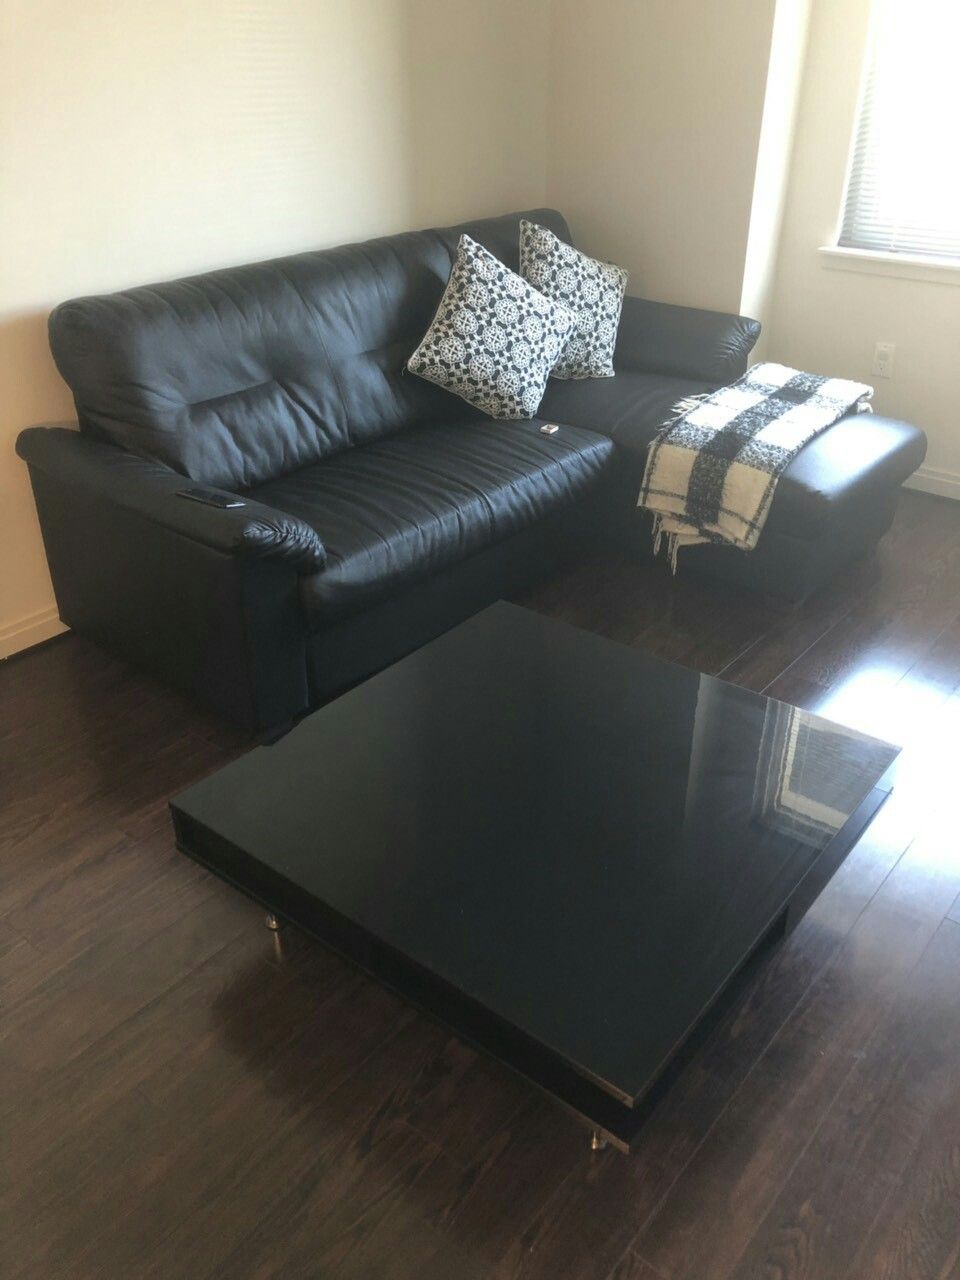 Irresistible Price: dinner table, coffee table and 4 chairs for sale